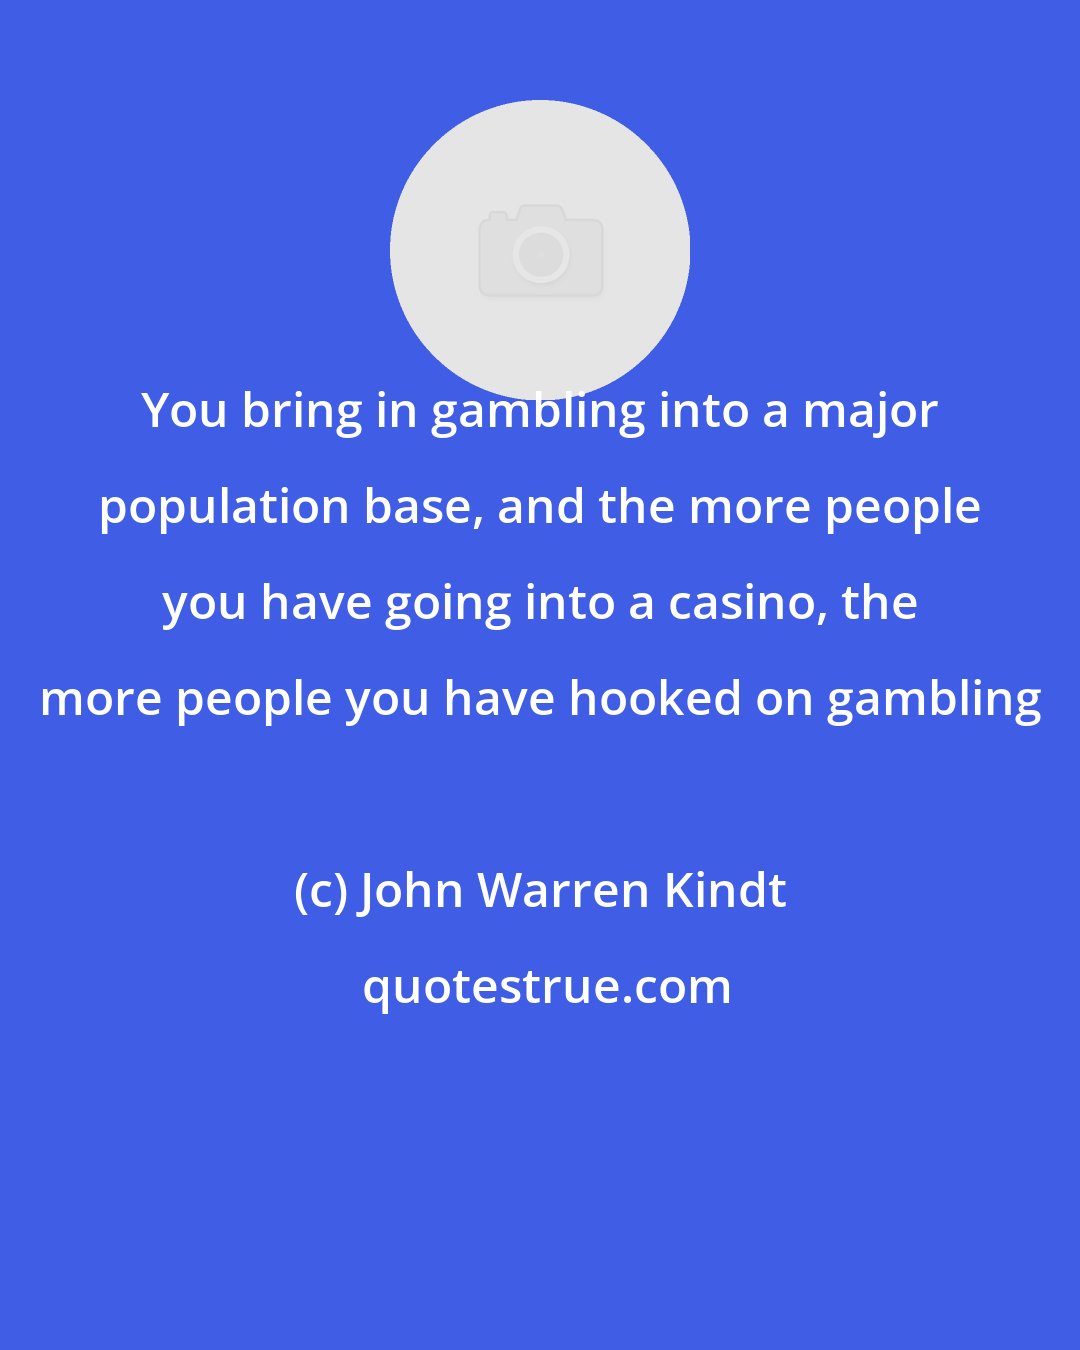 John Warren Kindt: You bring in gambling into a major population base, and the more people you have going into a casino, the more people you have hooked on gambling